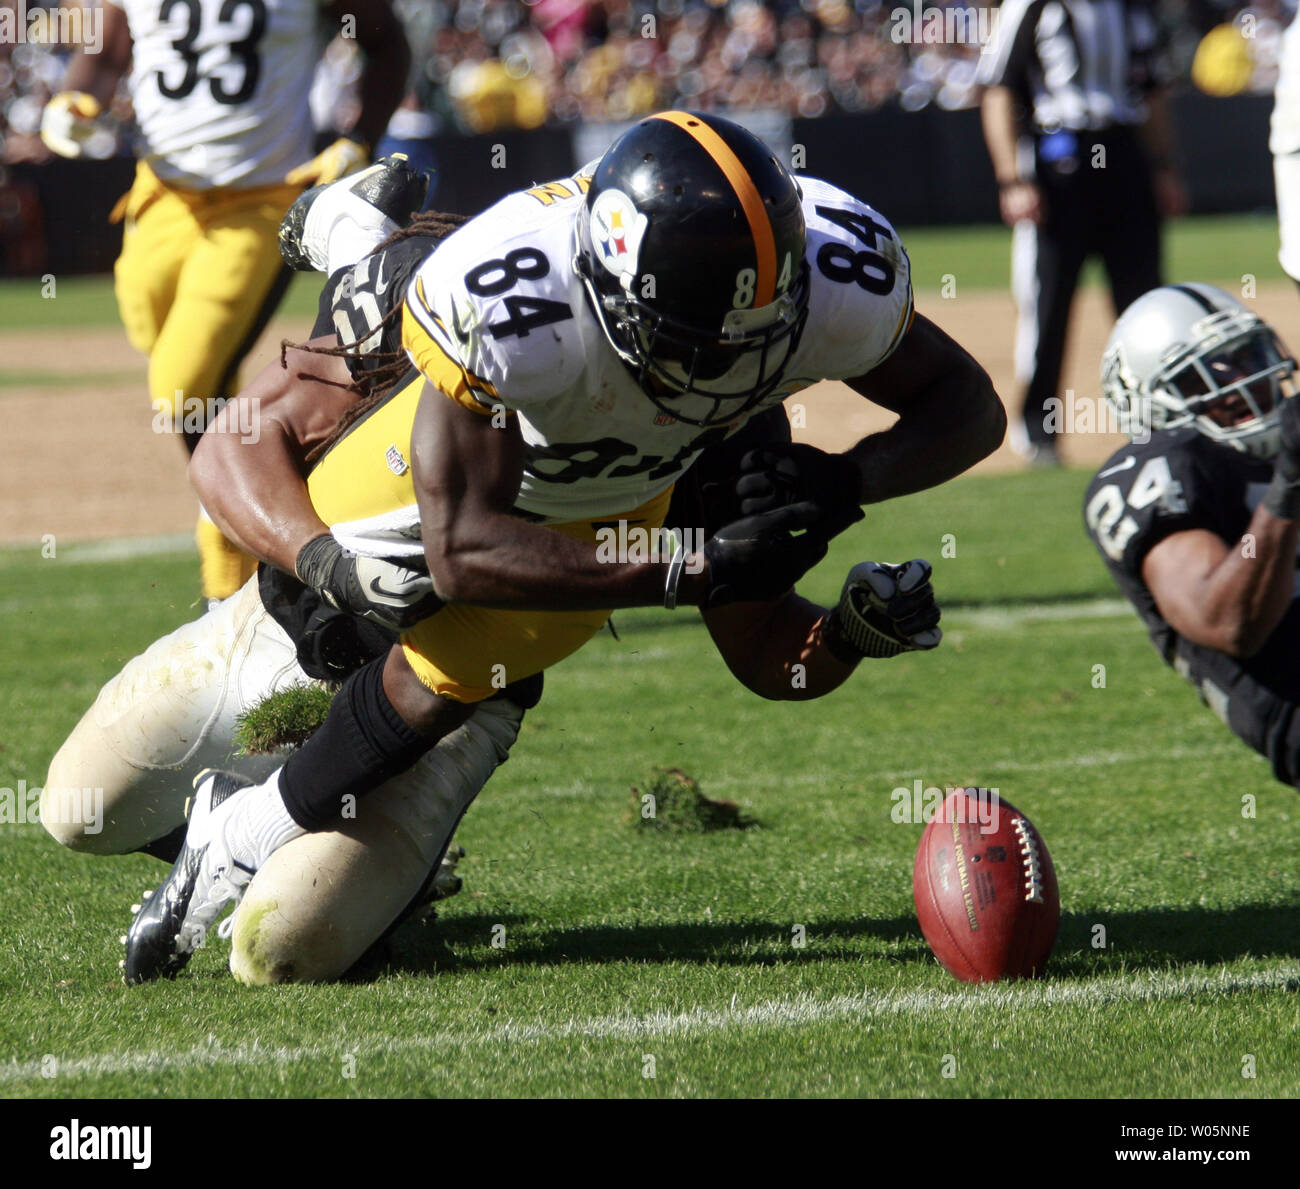 Pittsburgh Steelers WR Antonio Brown (84) is tackled by Oakland Raiders LB Philip Wheeler (52) on the 1 yd line before recovering his own fumble for a touchdown during the third quarter  at O.co Coliseum in Oakland, California on September 23, 2012.       UPI/Bruce Gordon Stock Photo